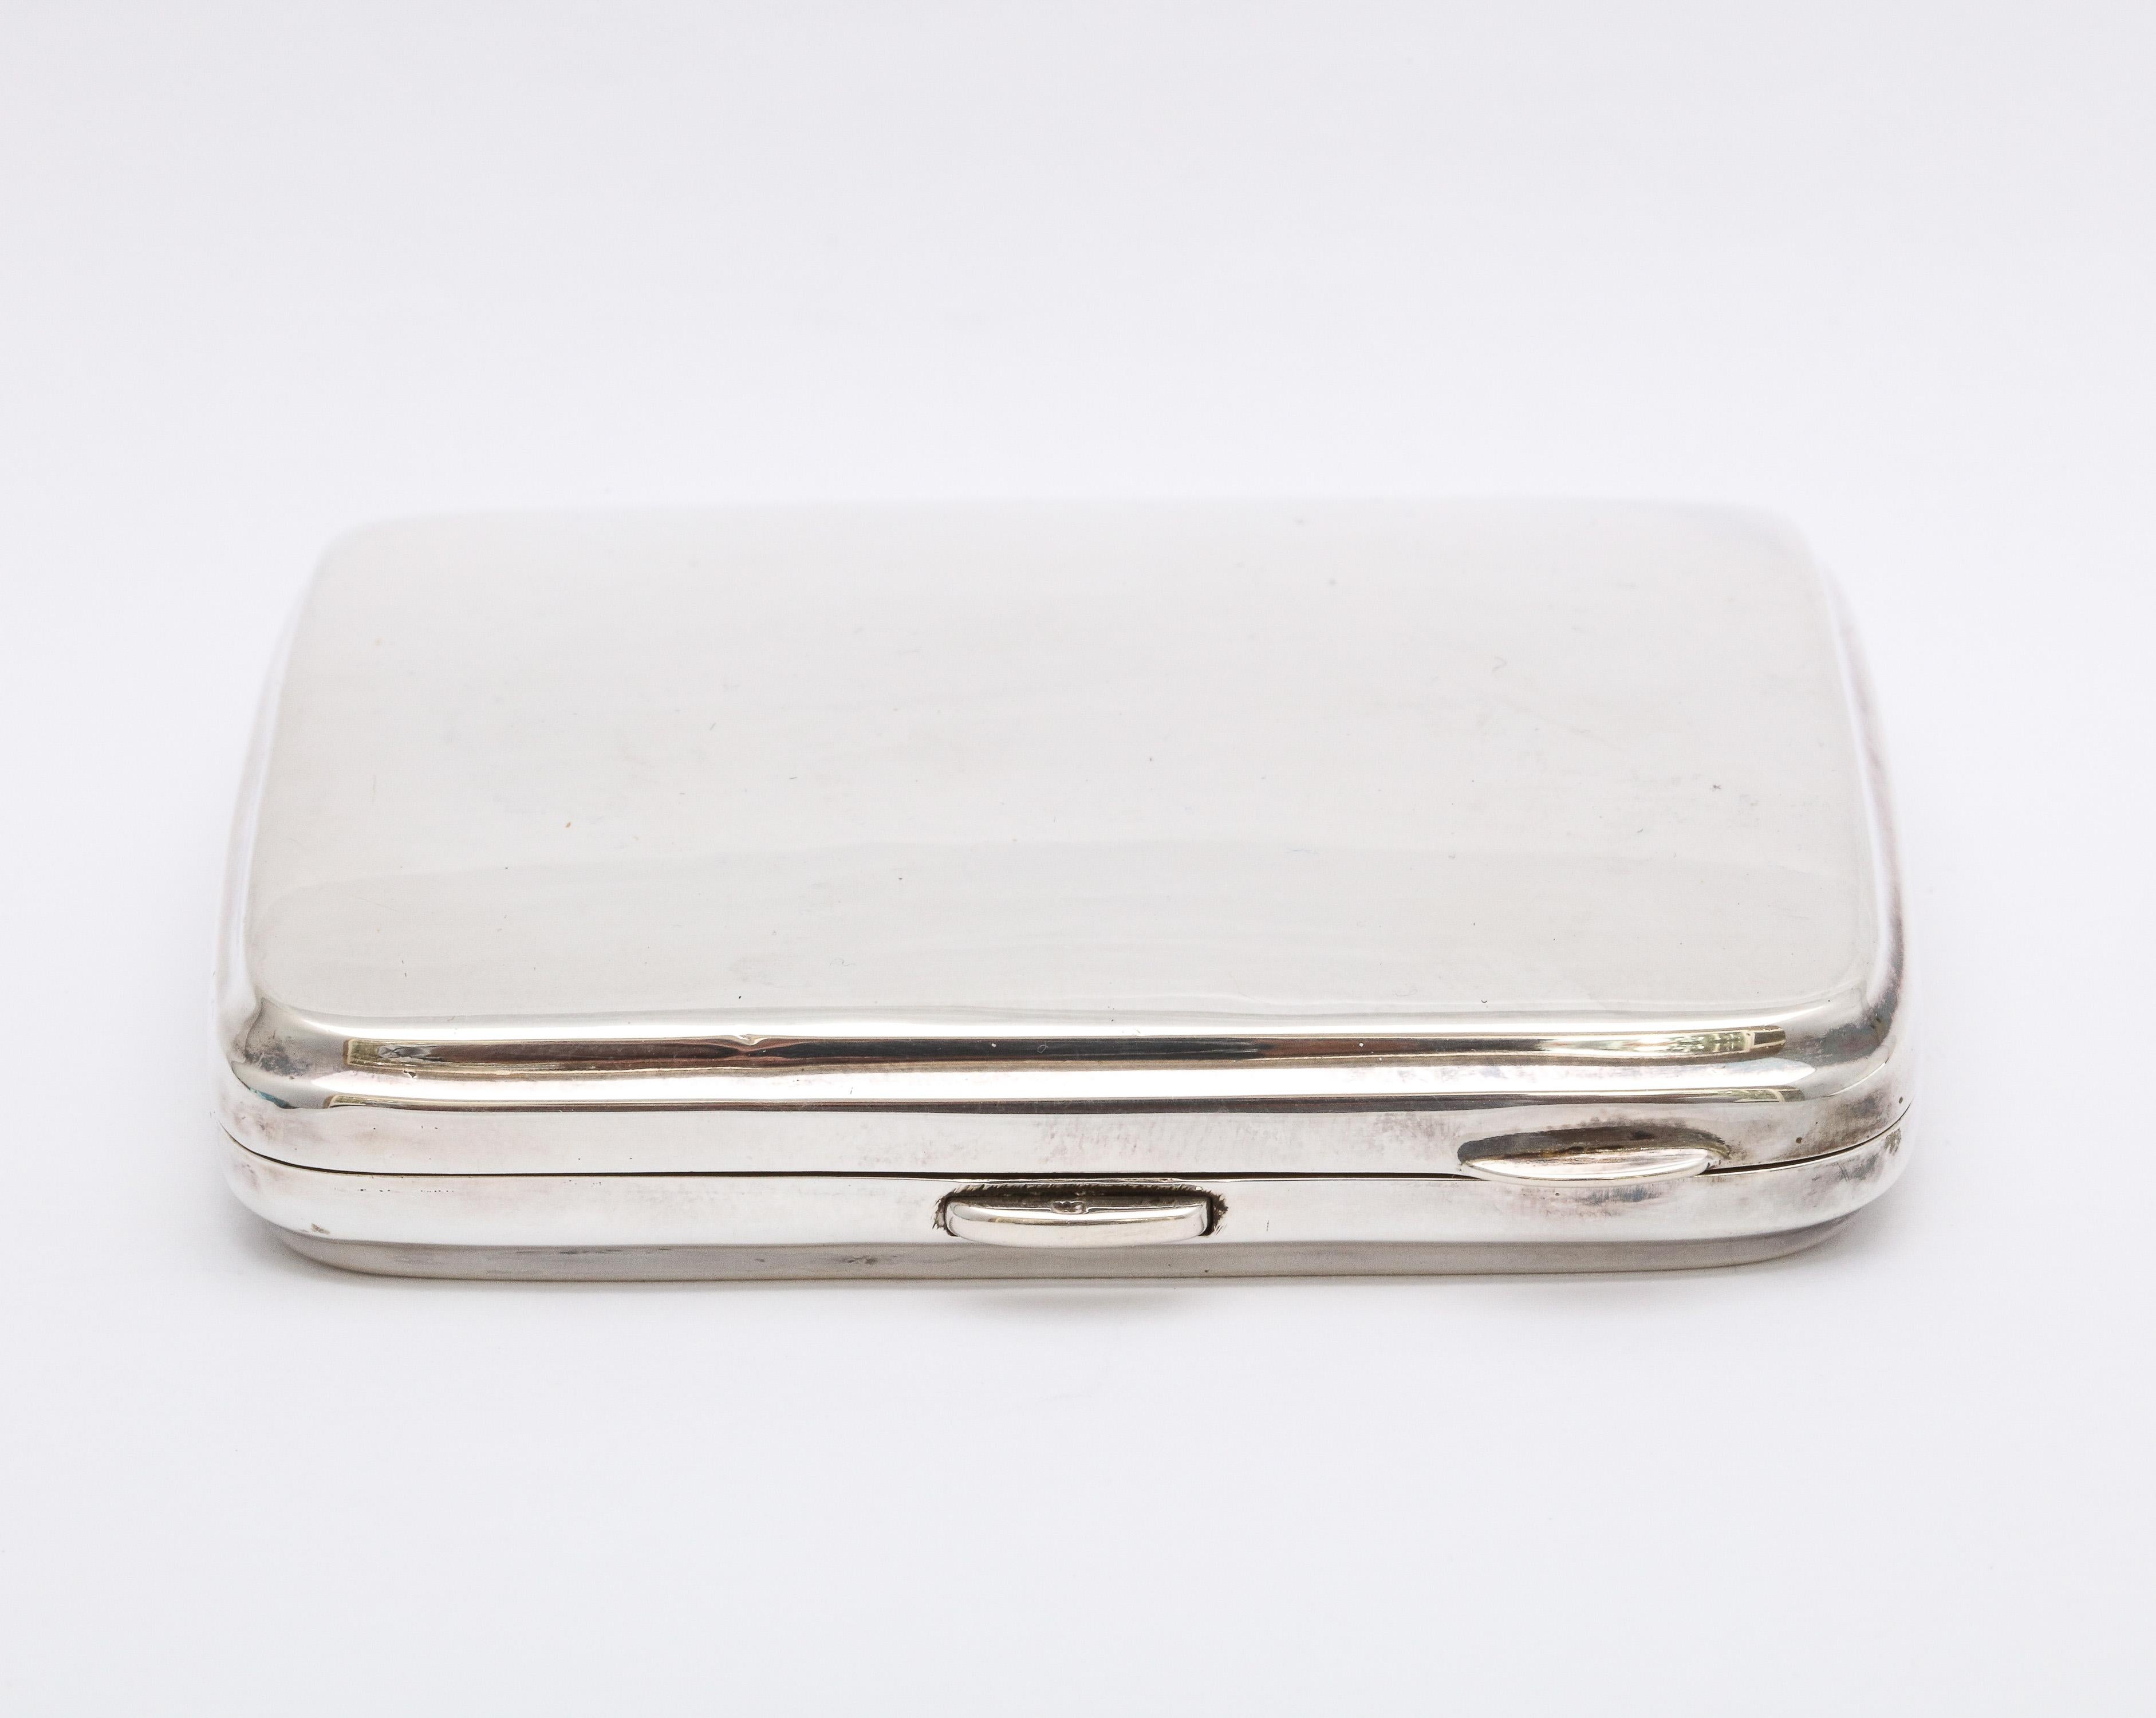 Art Deco, sterling silver cigarette case, Birmingham, England, year hallmarked for 1923, William Haseler - maker. Clean lines; gilded interior. When closed, measures 3 3 1/4 inches wide (including clasp) x 3 1/4 inches deep x 1 1/8 inches high; when